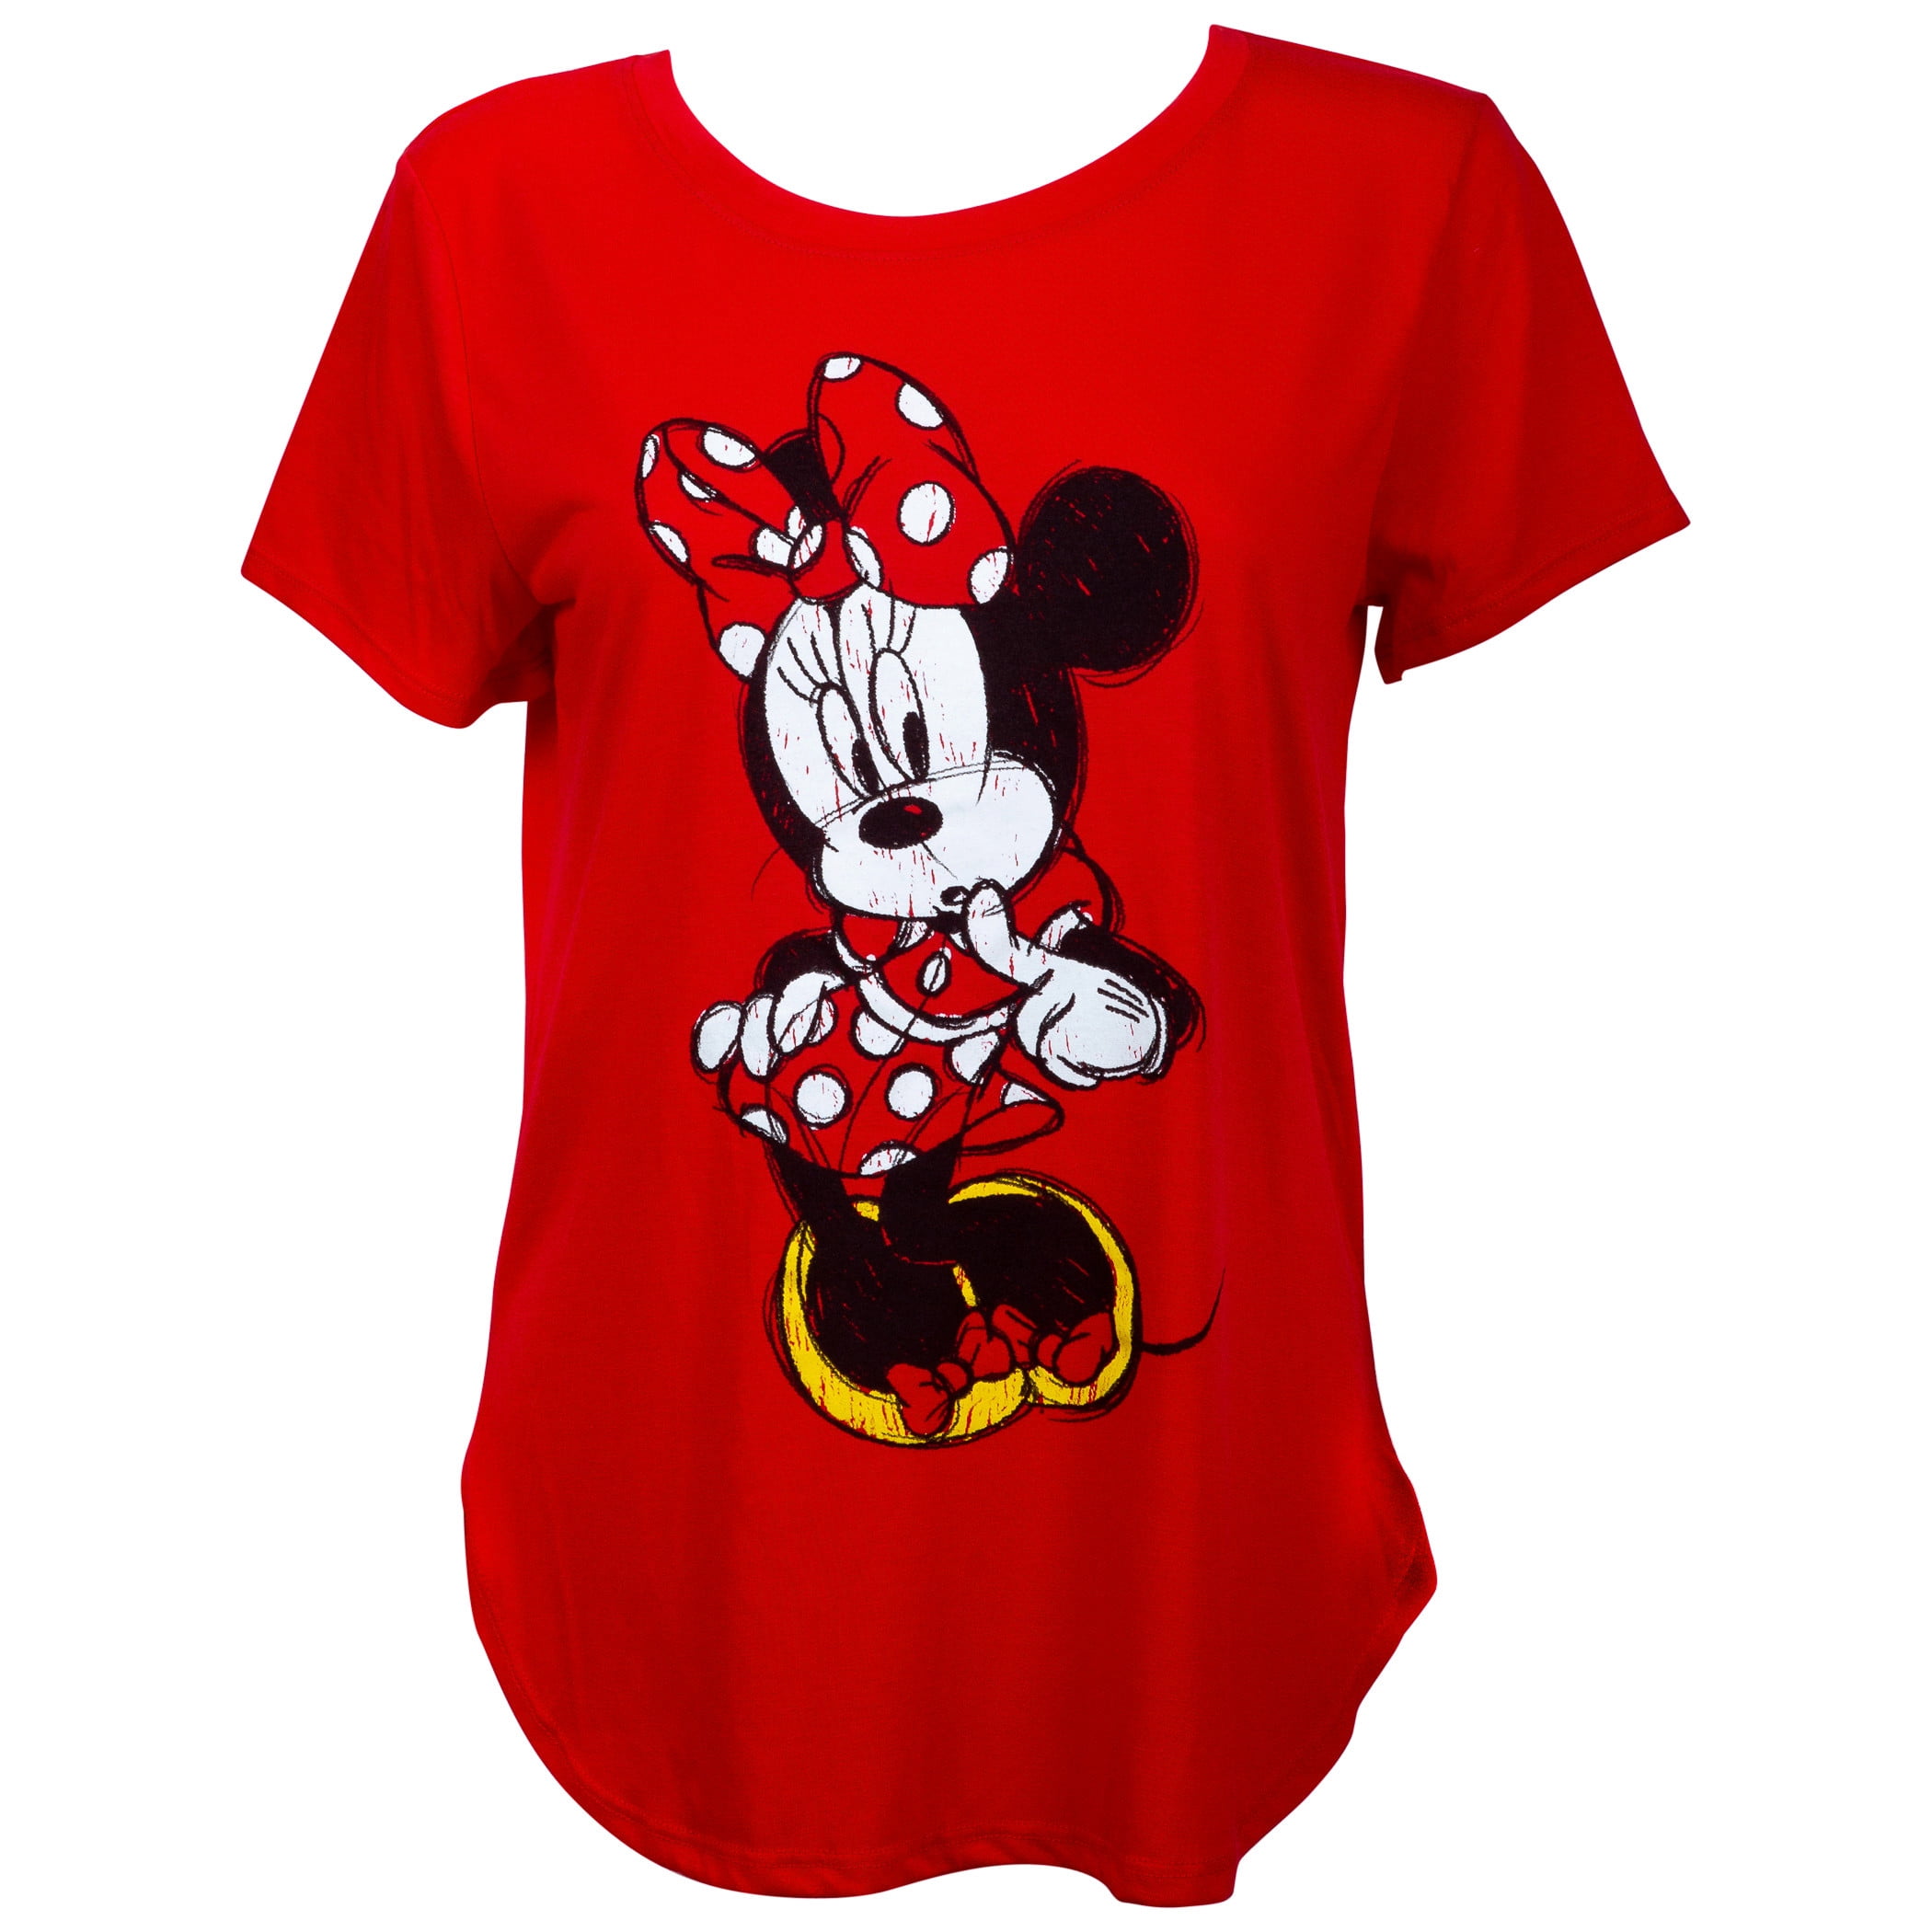 red minnie mouse shirt